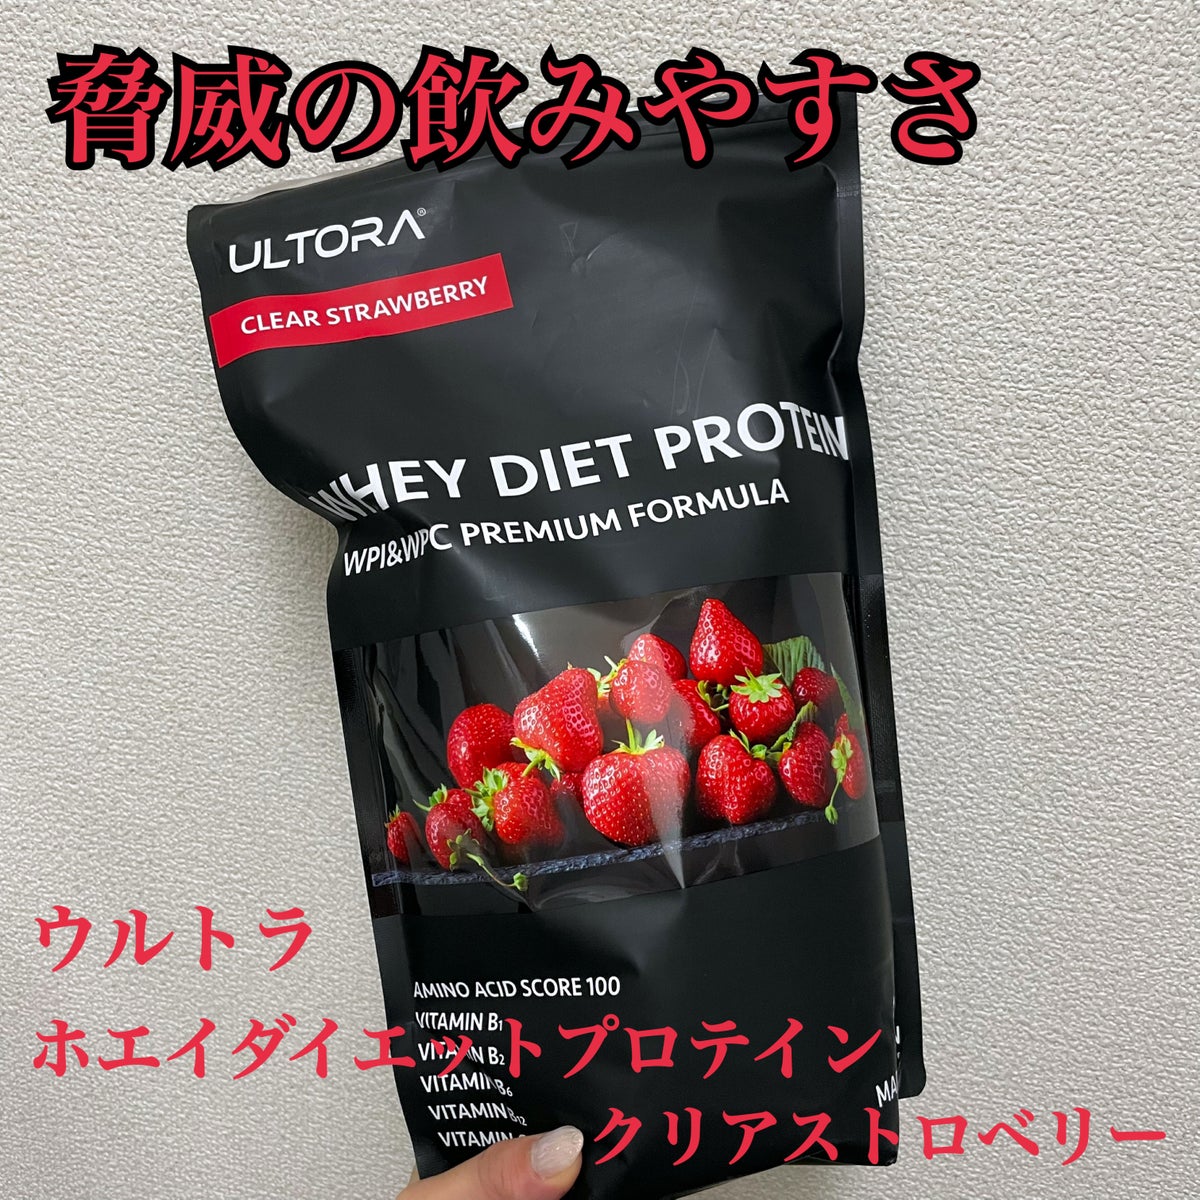 ULTRA WHEY DIET PROTEIN｜ULTRAの効果に関する口コミ - 脅威の飲み ...